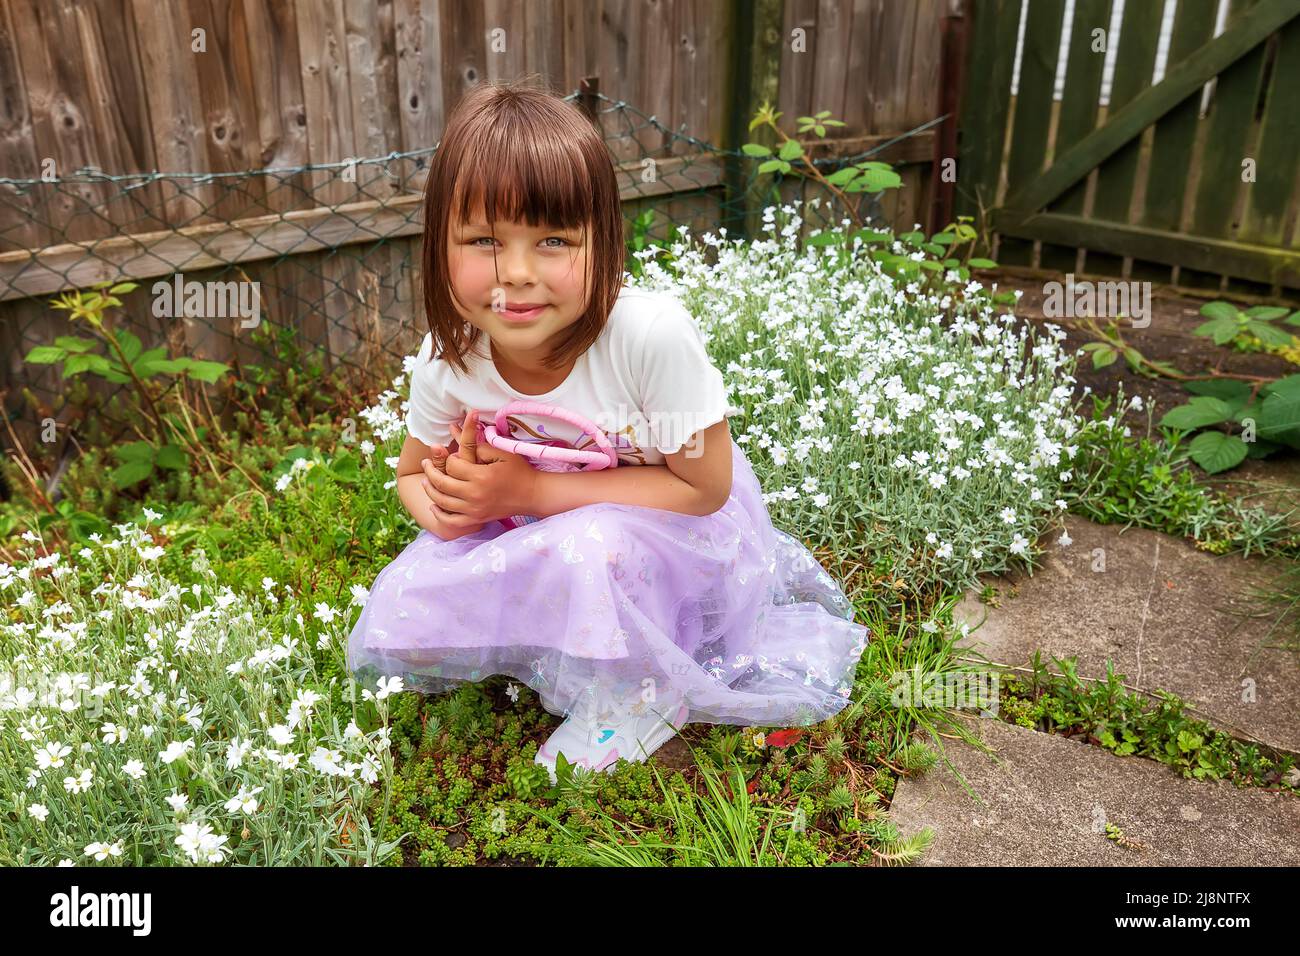 A cute smiling girl is playing in the backyard with small pink bag. Sunny day. Good spring weather Stock Photo